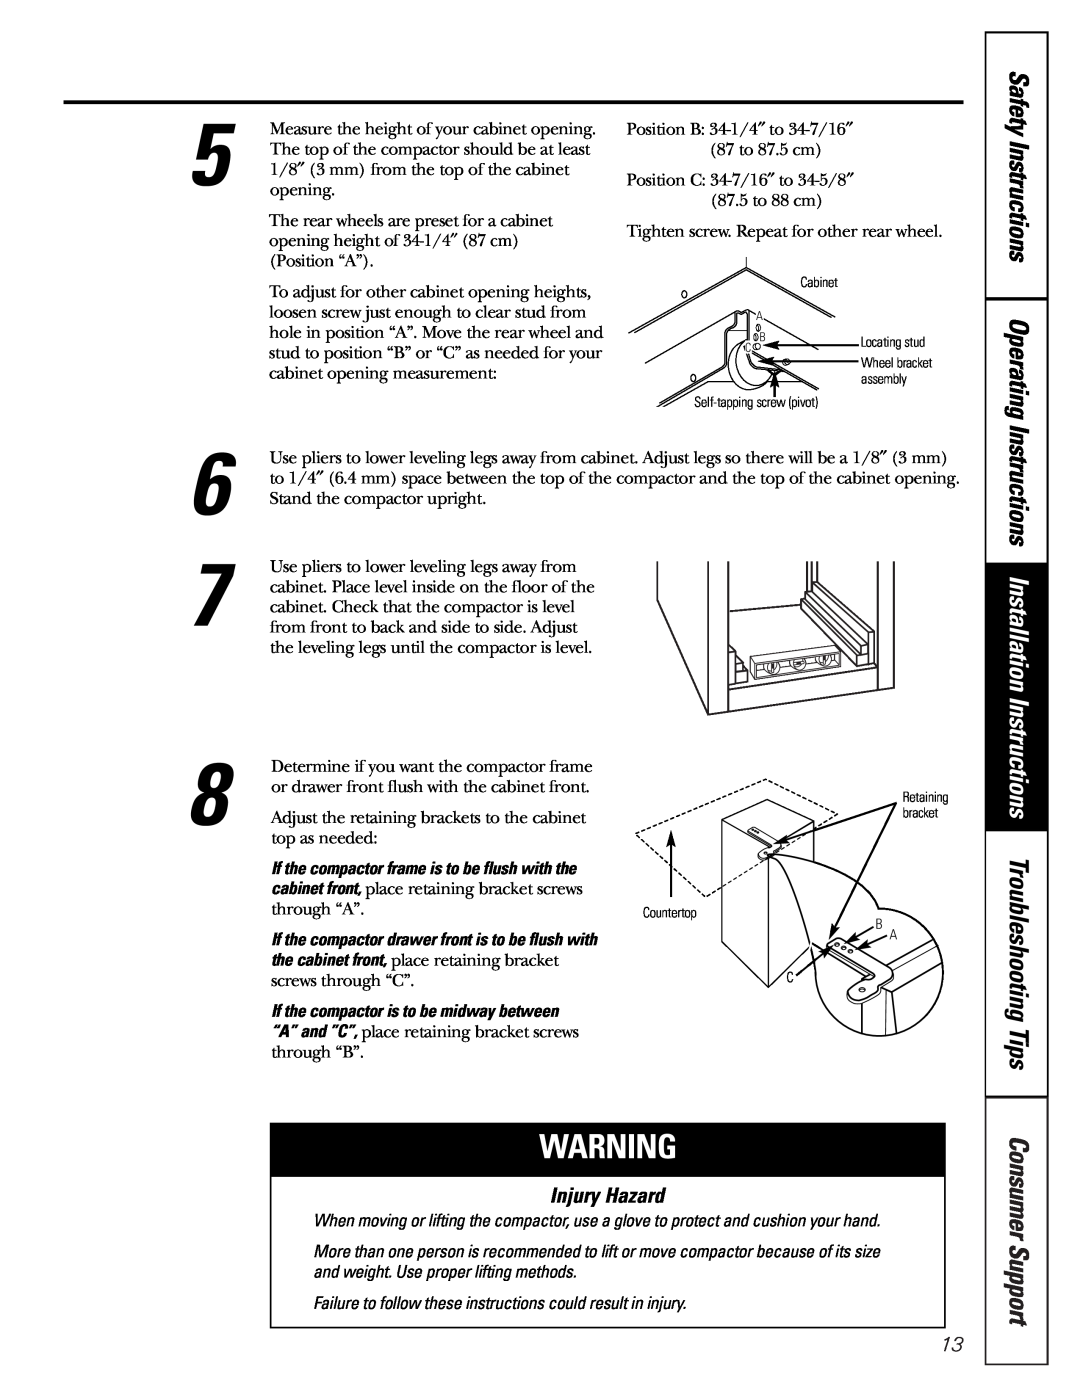 GE GCG1520 owner manual Safety Instructions Operating, Injury Hazard, If the compactor frame is to be flush with the 